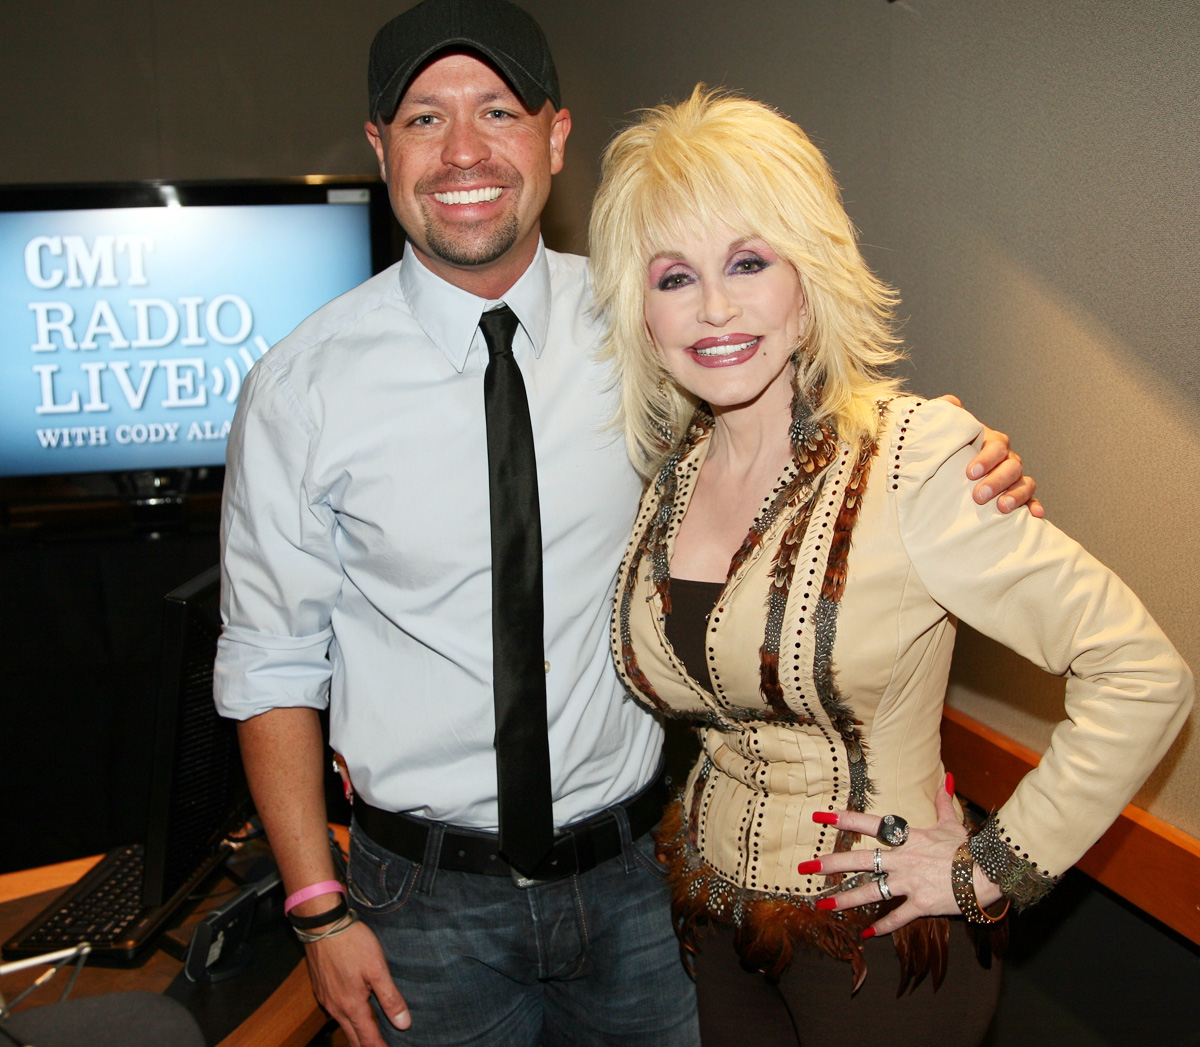 Dolly Parton stops by CMT Radio Live